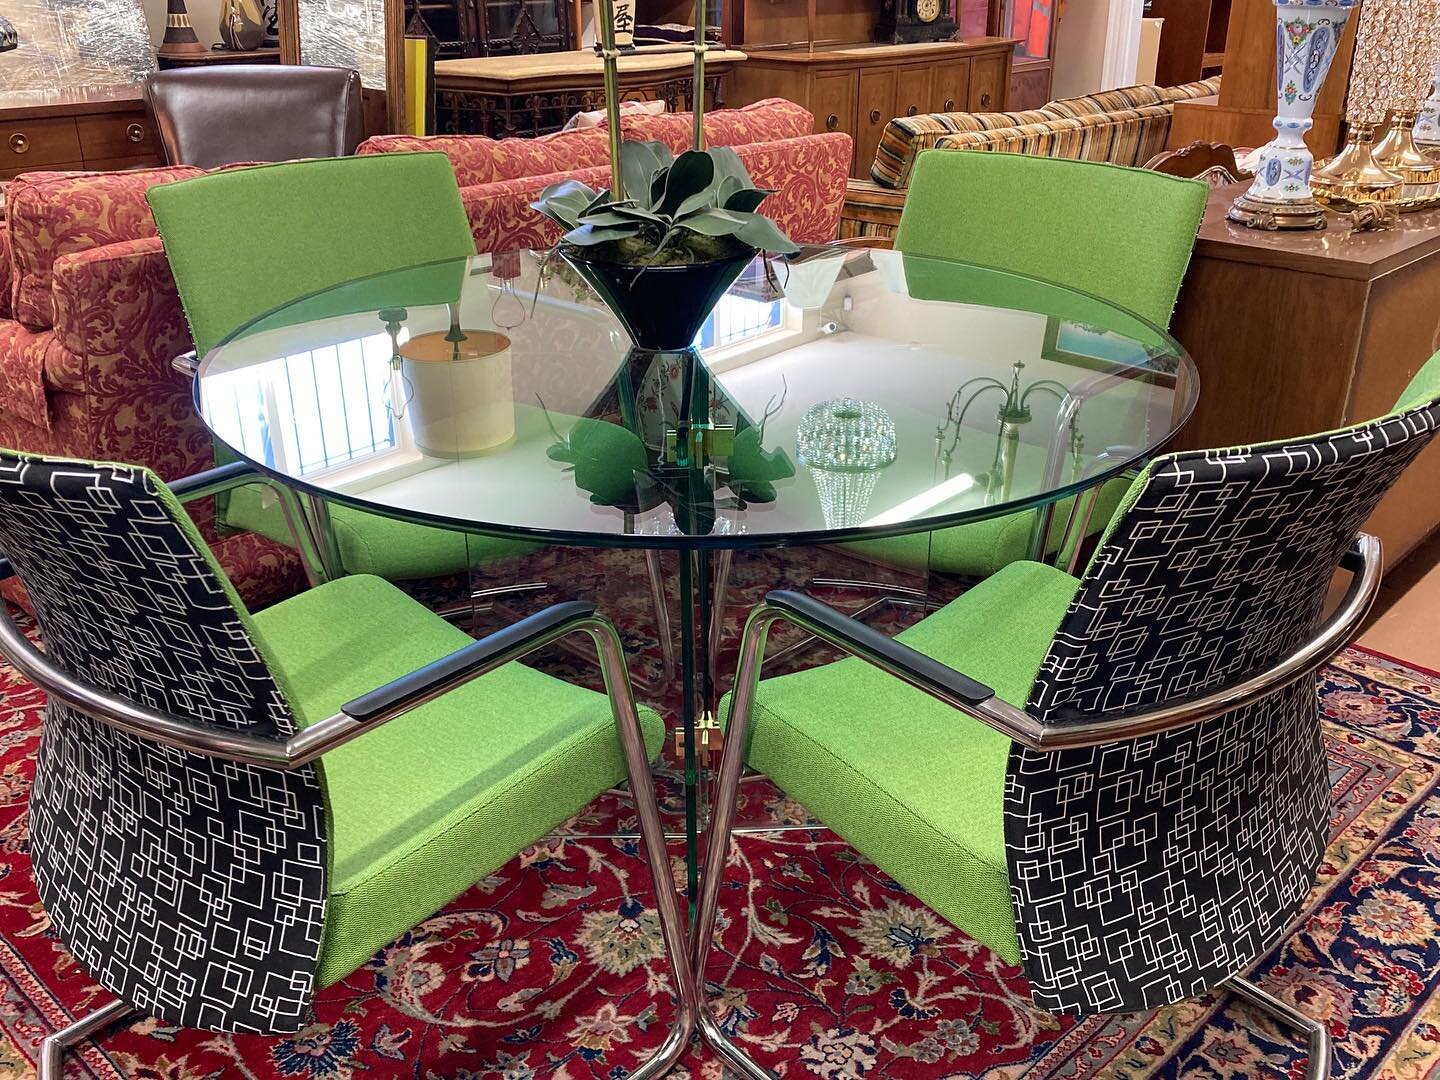 Featured Piece: Mod style table and six chairs